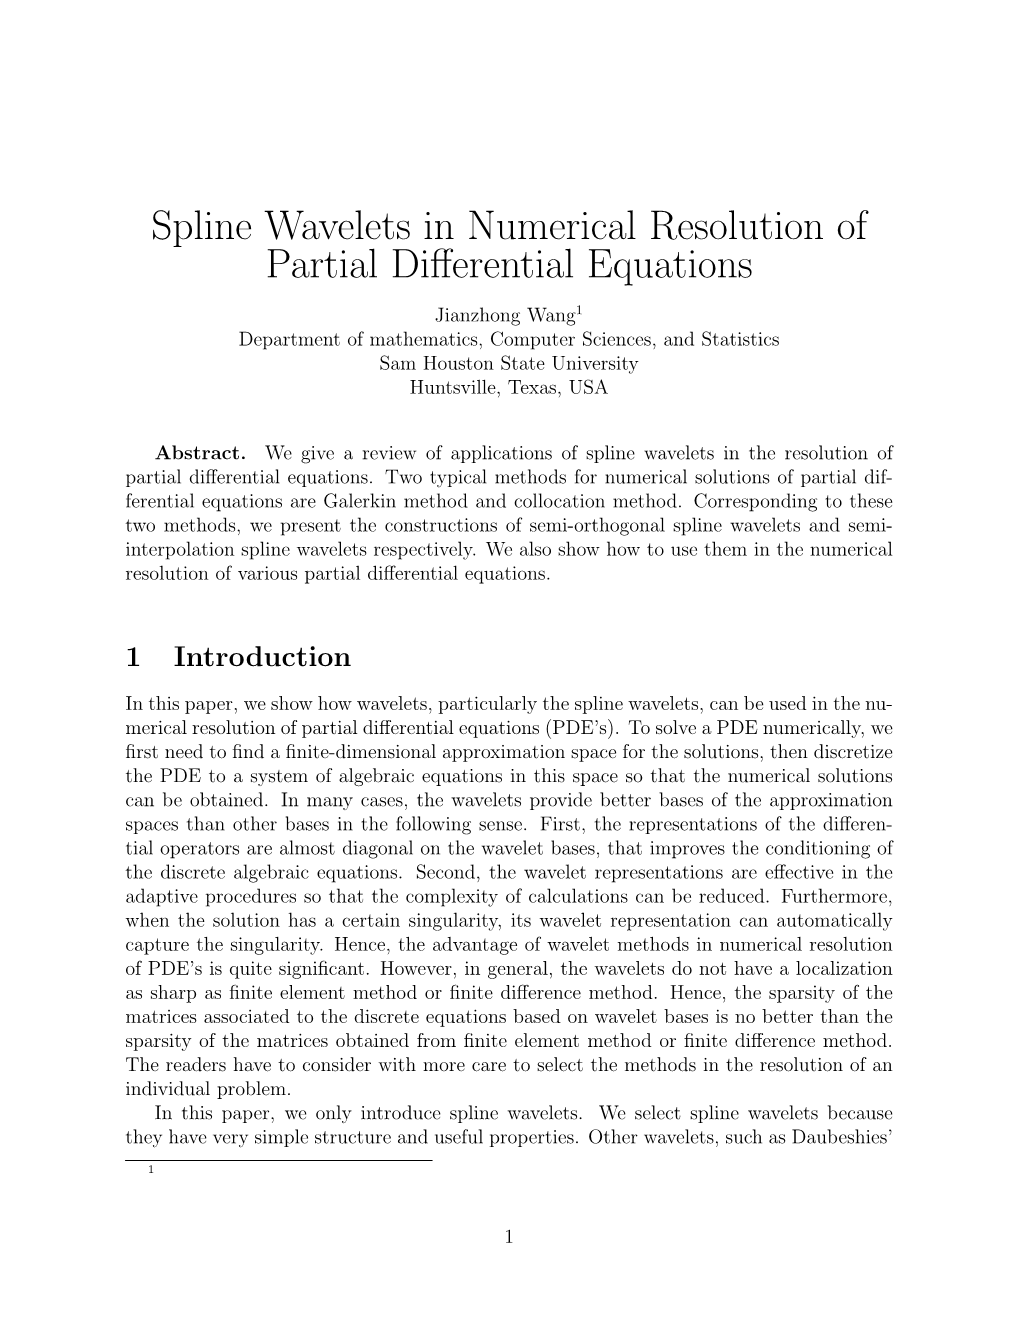 Spline Wavelets in Numerical Resolution of Partial Differential